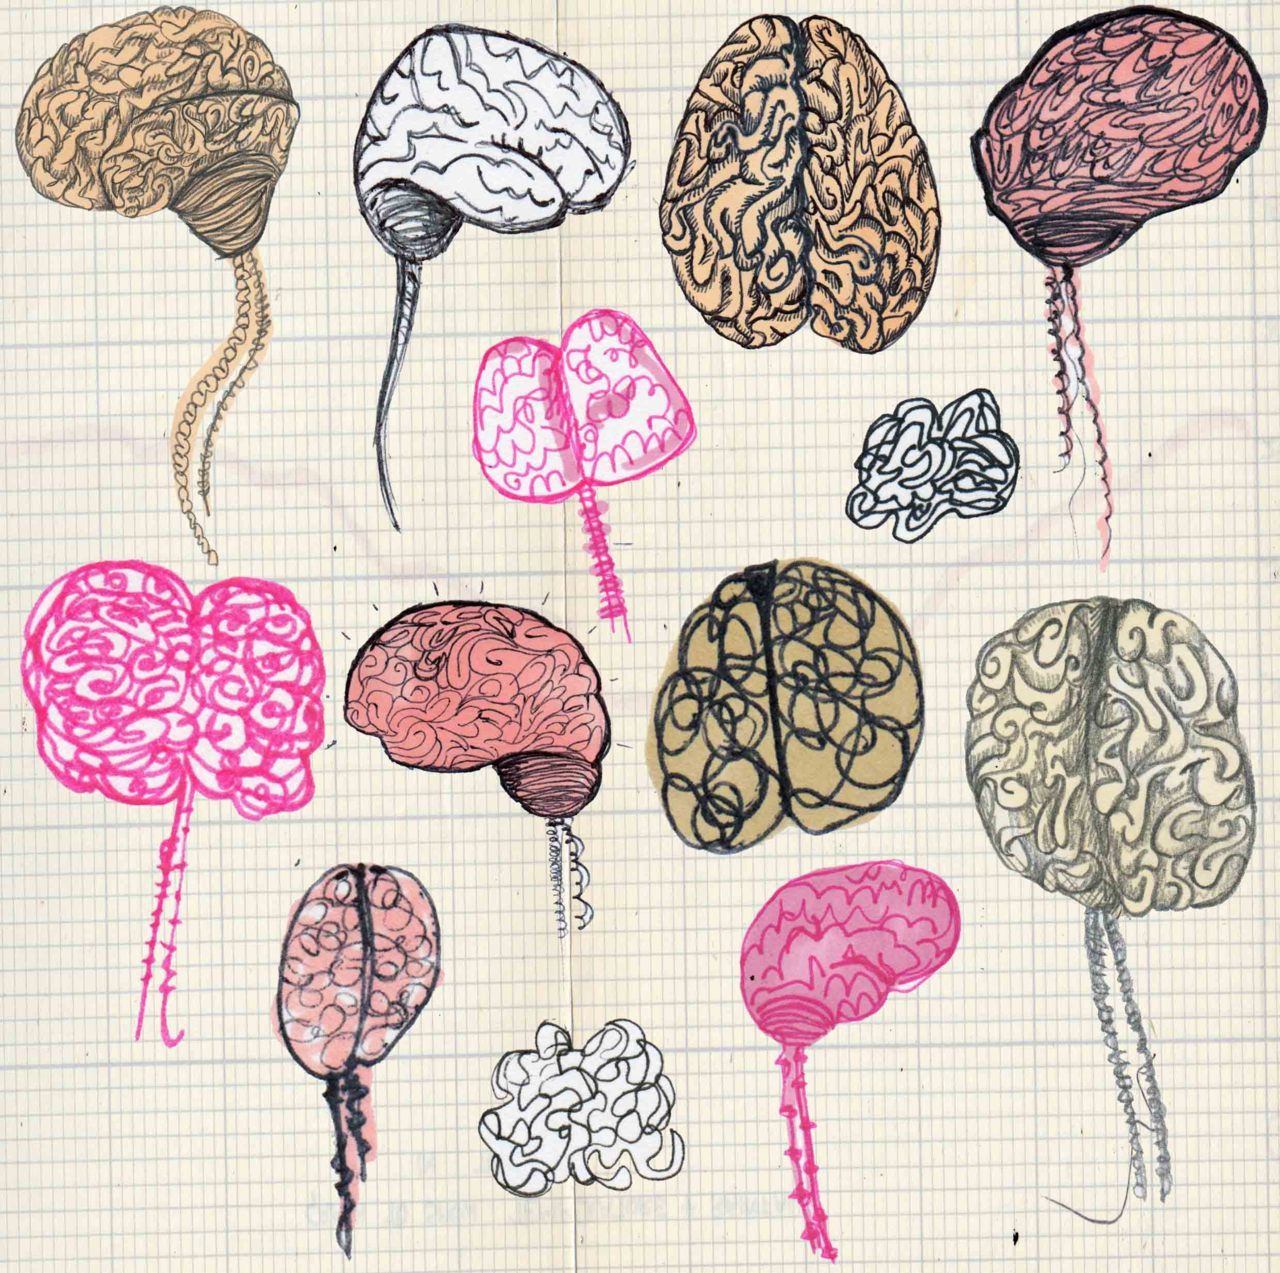 Brain drawings from my sketchbook, for more please visit me here :)